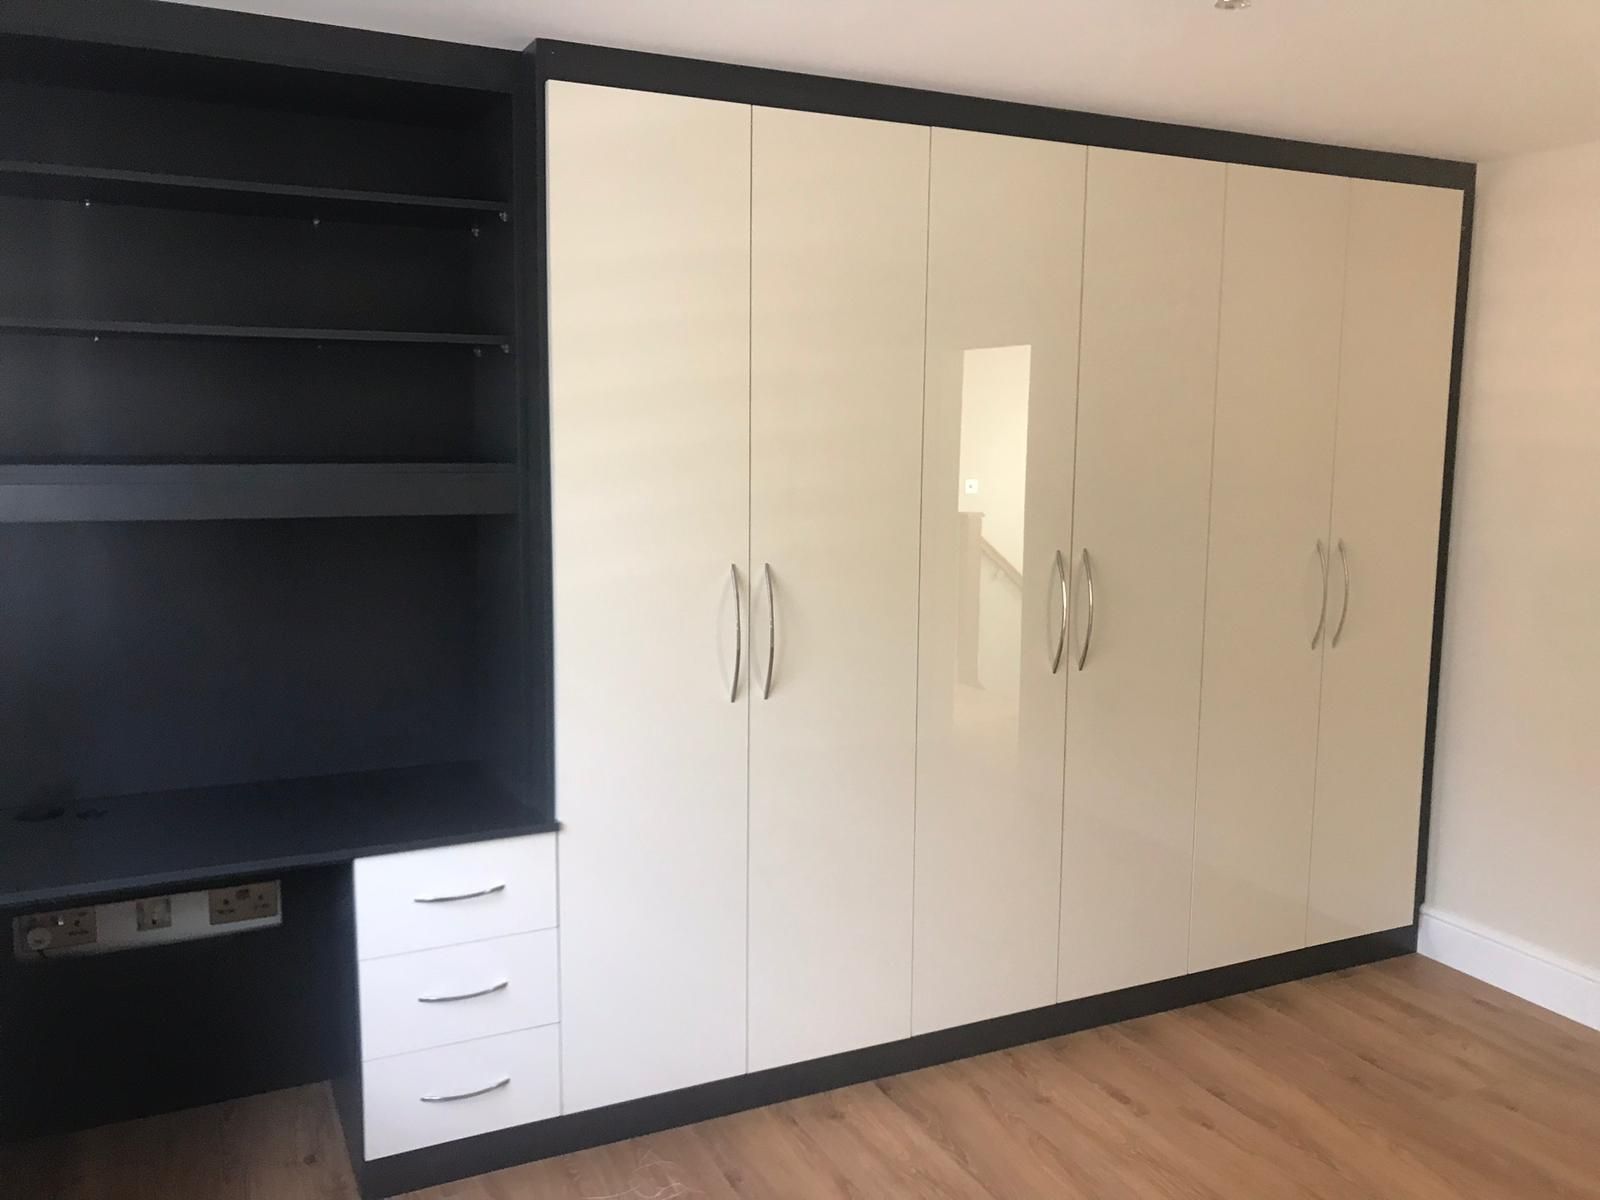 Bespoke Fitted Wardrobe Utilizing A High Gloss Ultra White And Pebble Black  Wood Inside White High Gloss Wardrobes (View 6 of 11)